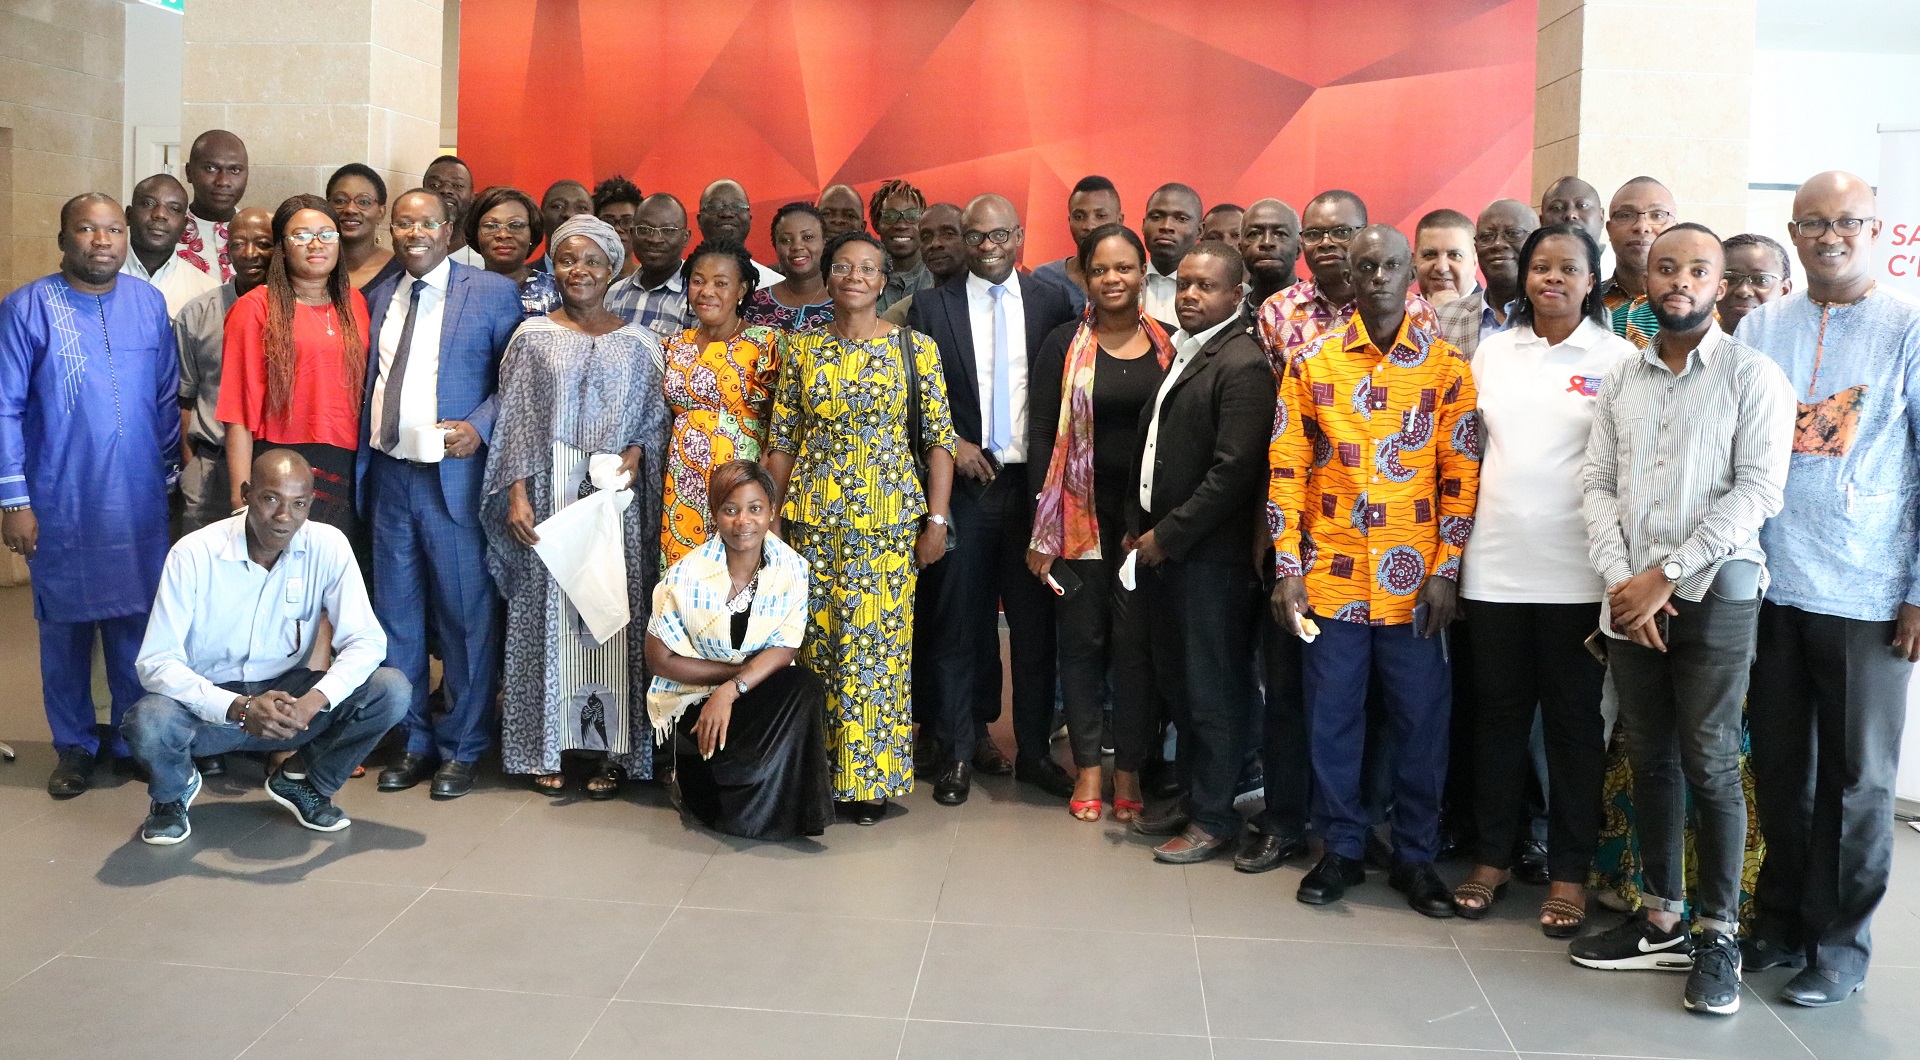 National Dialogue on Civil Society Involvement in Accelerating the HIV Response in Côte d'Ivoire